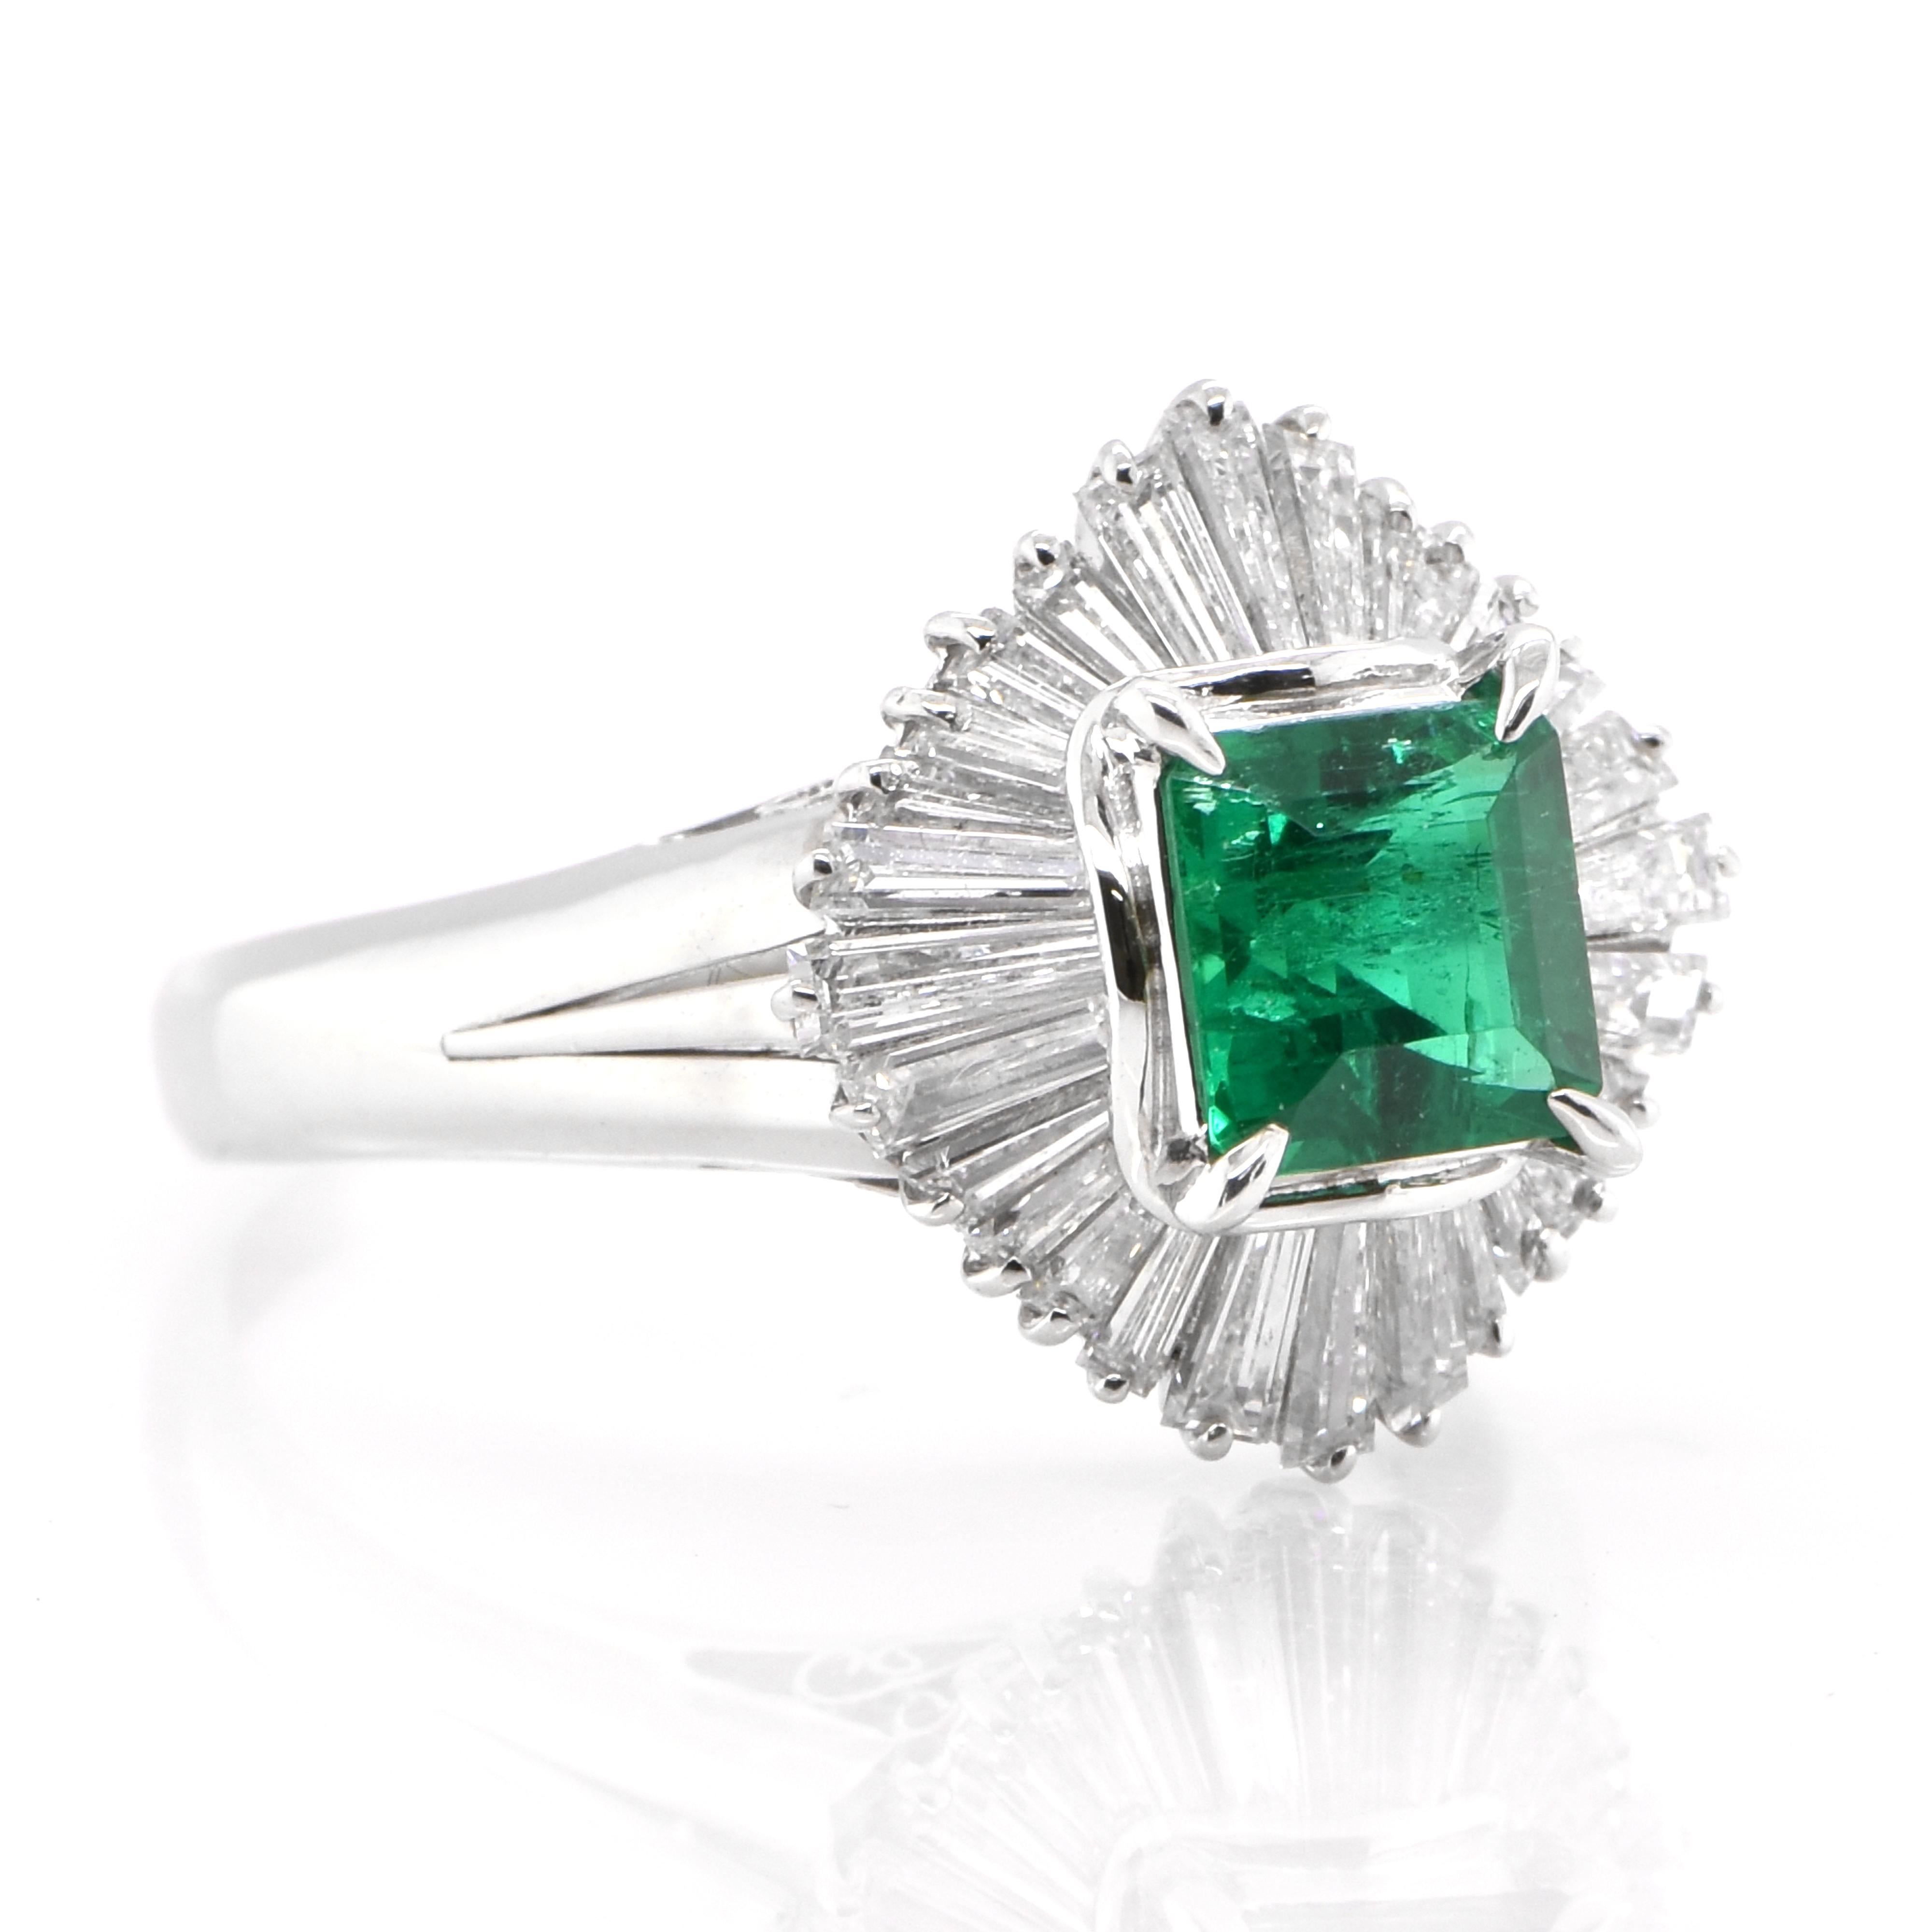 A stunning Vintage Ballerina Ring featuring a 0.68 Carat Natural Emerald and 0.80 Carats of Diamond Accents set in Platinum. People have admired emerald’s green for thousands of years. Emeralds have always been associated with the lushest landscapes